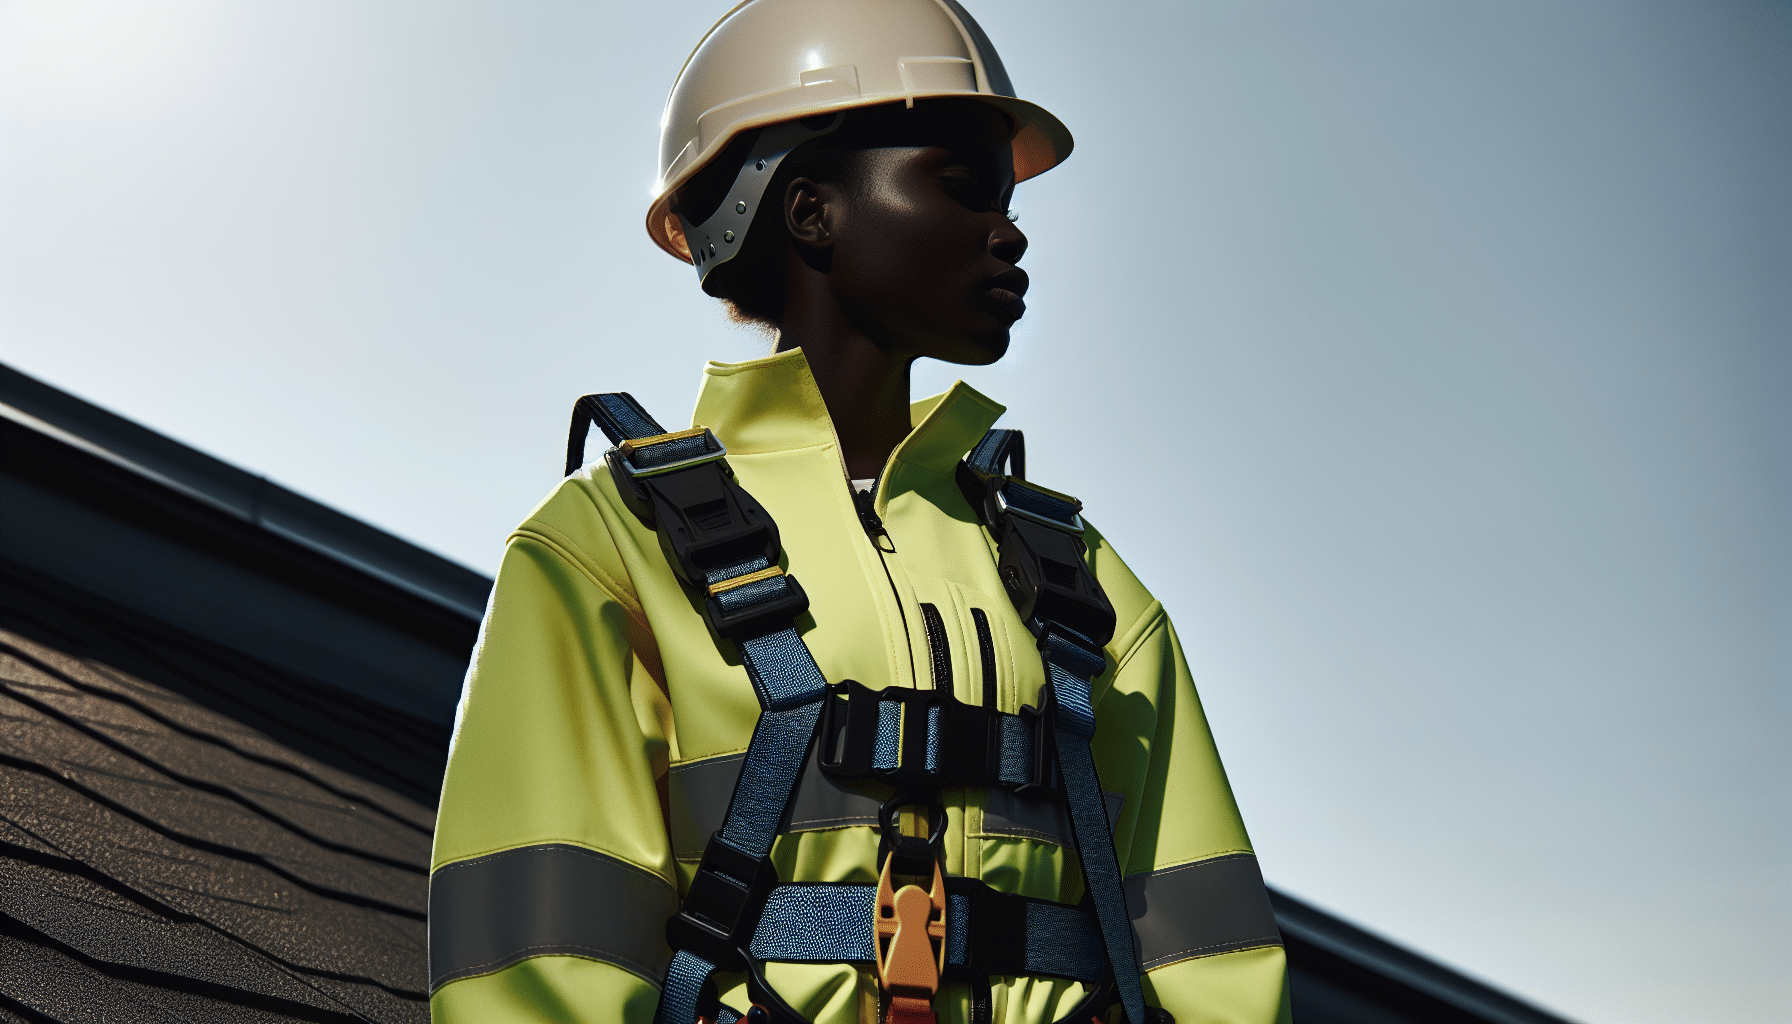 illustration of a roofer wearing safety harness and hard hat